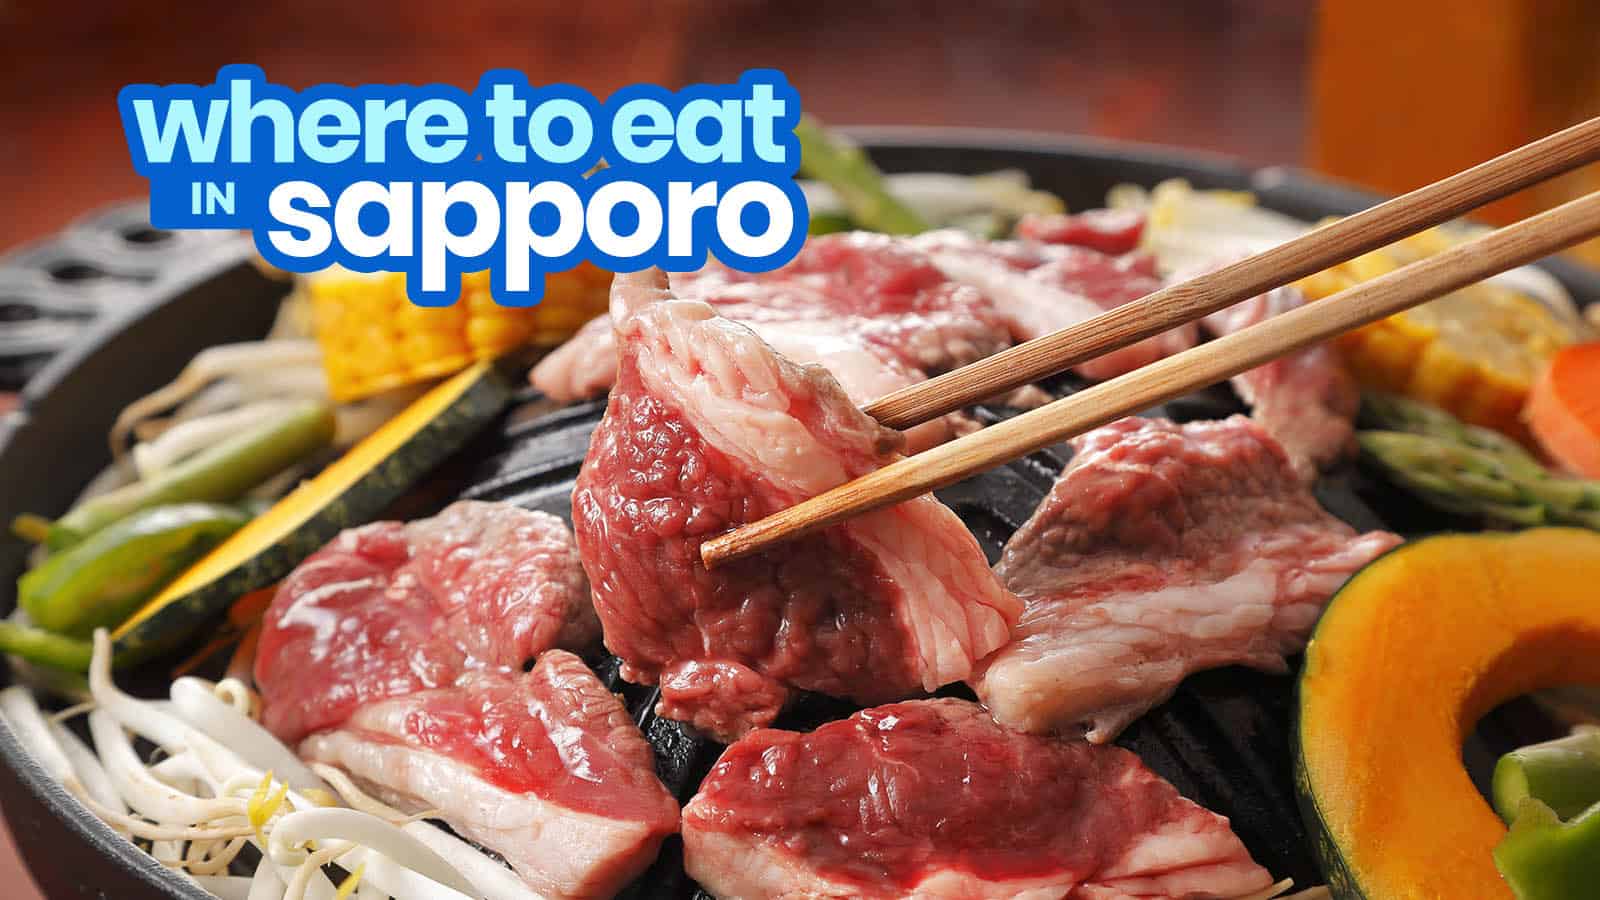 WHERE TO EAT CHEAP IN SAPPORO